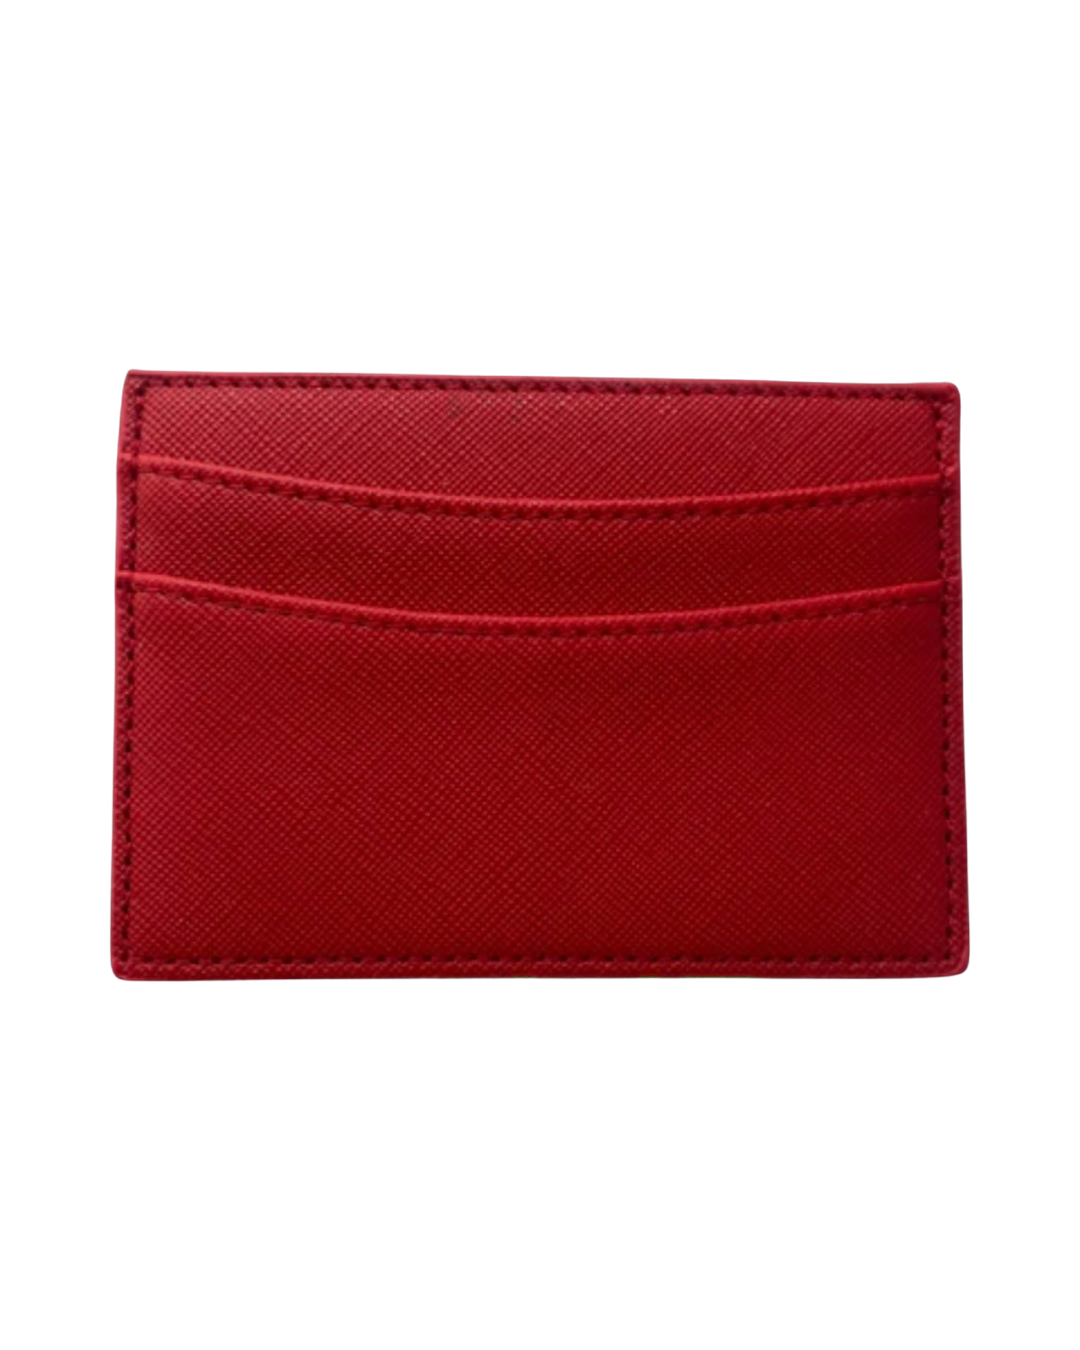 Customizable Card Holder -Red